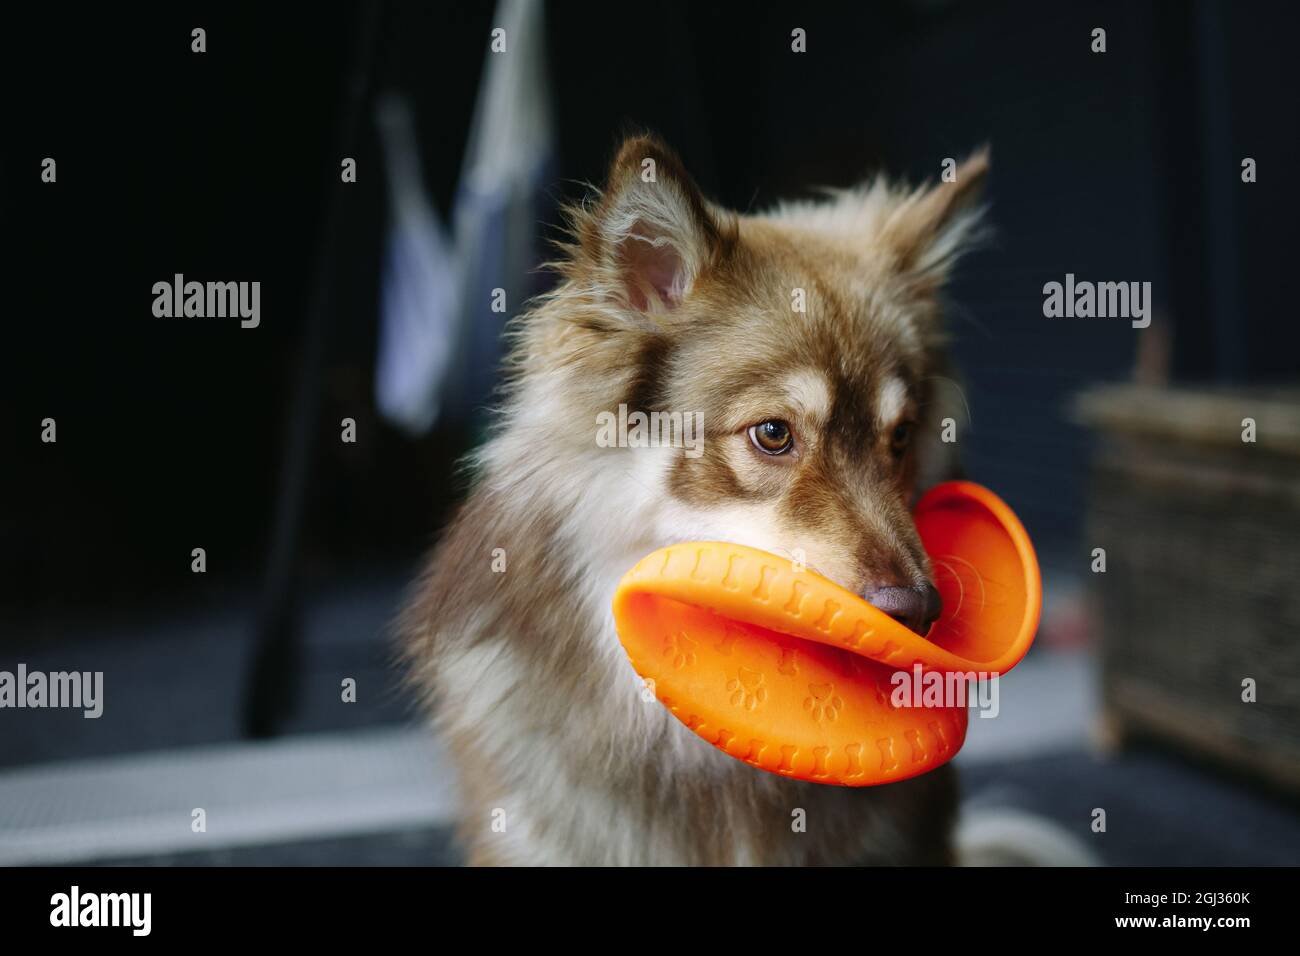 Portrait of a dog, holding an orange toy in the mouth. Finnish lapphund. Stock Photo